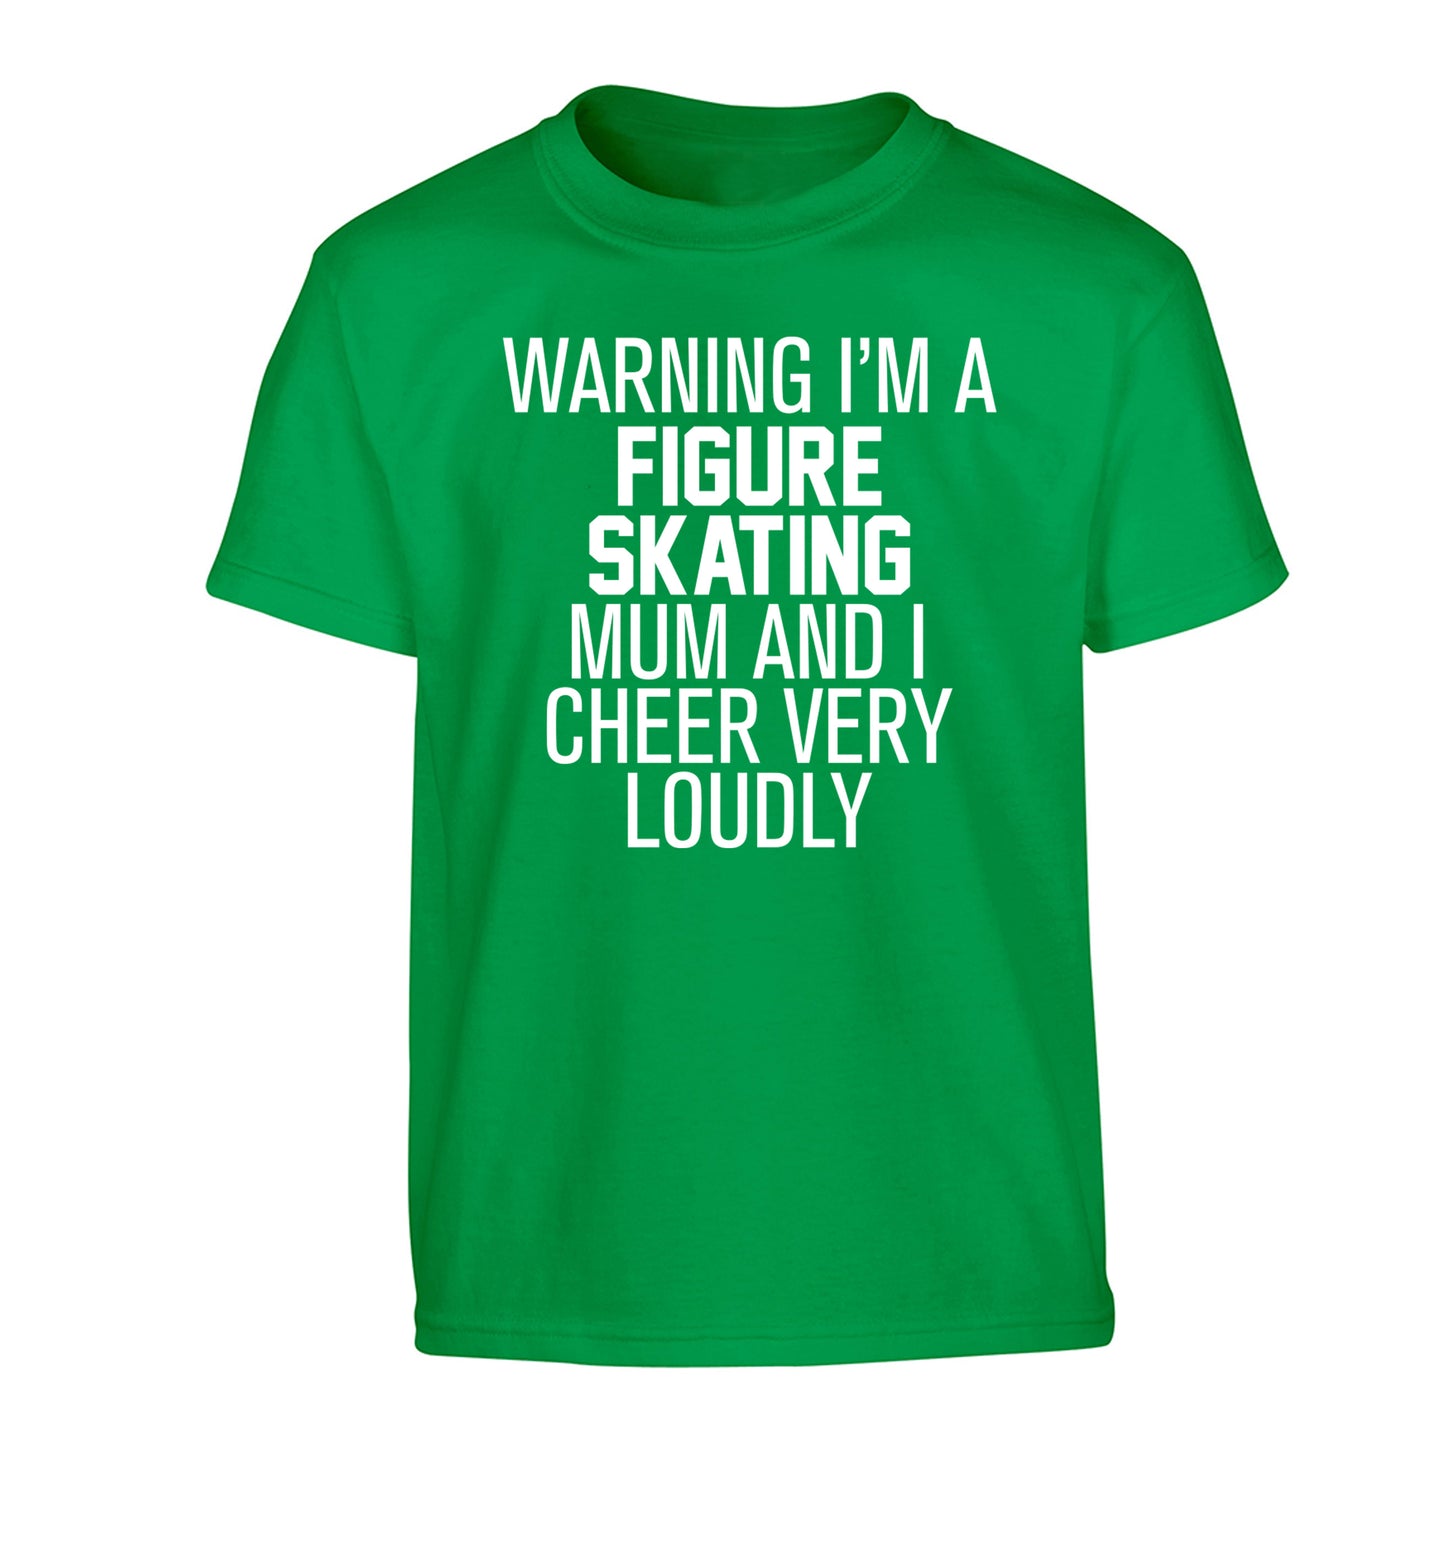 Warning I'm a figure skating mum and I cheer very loudly Children's green Tshirt 12-14 Years